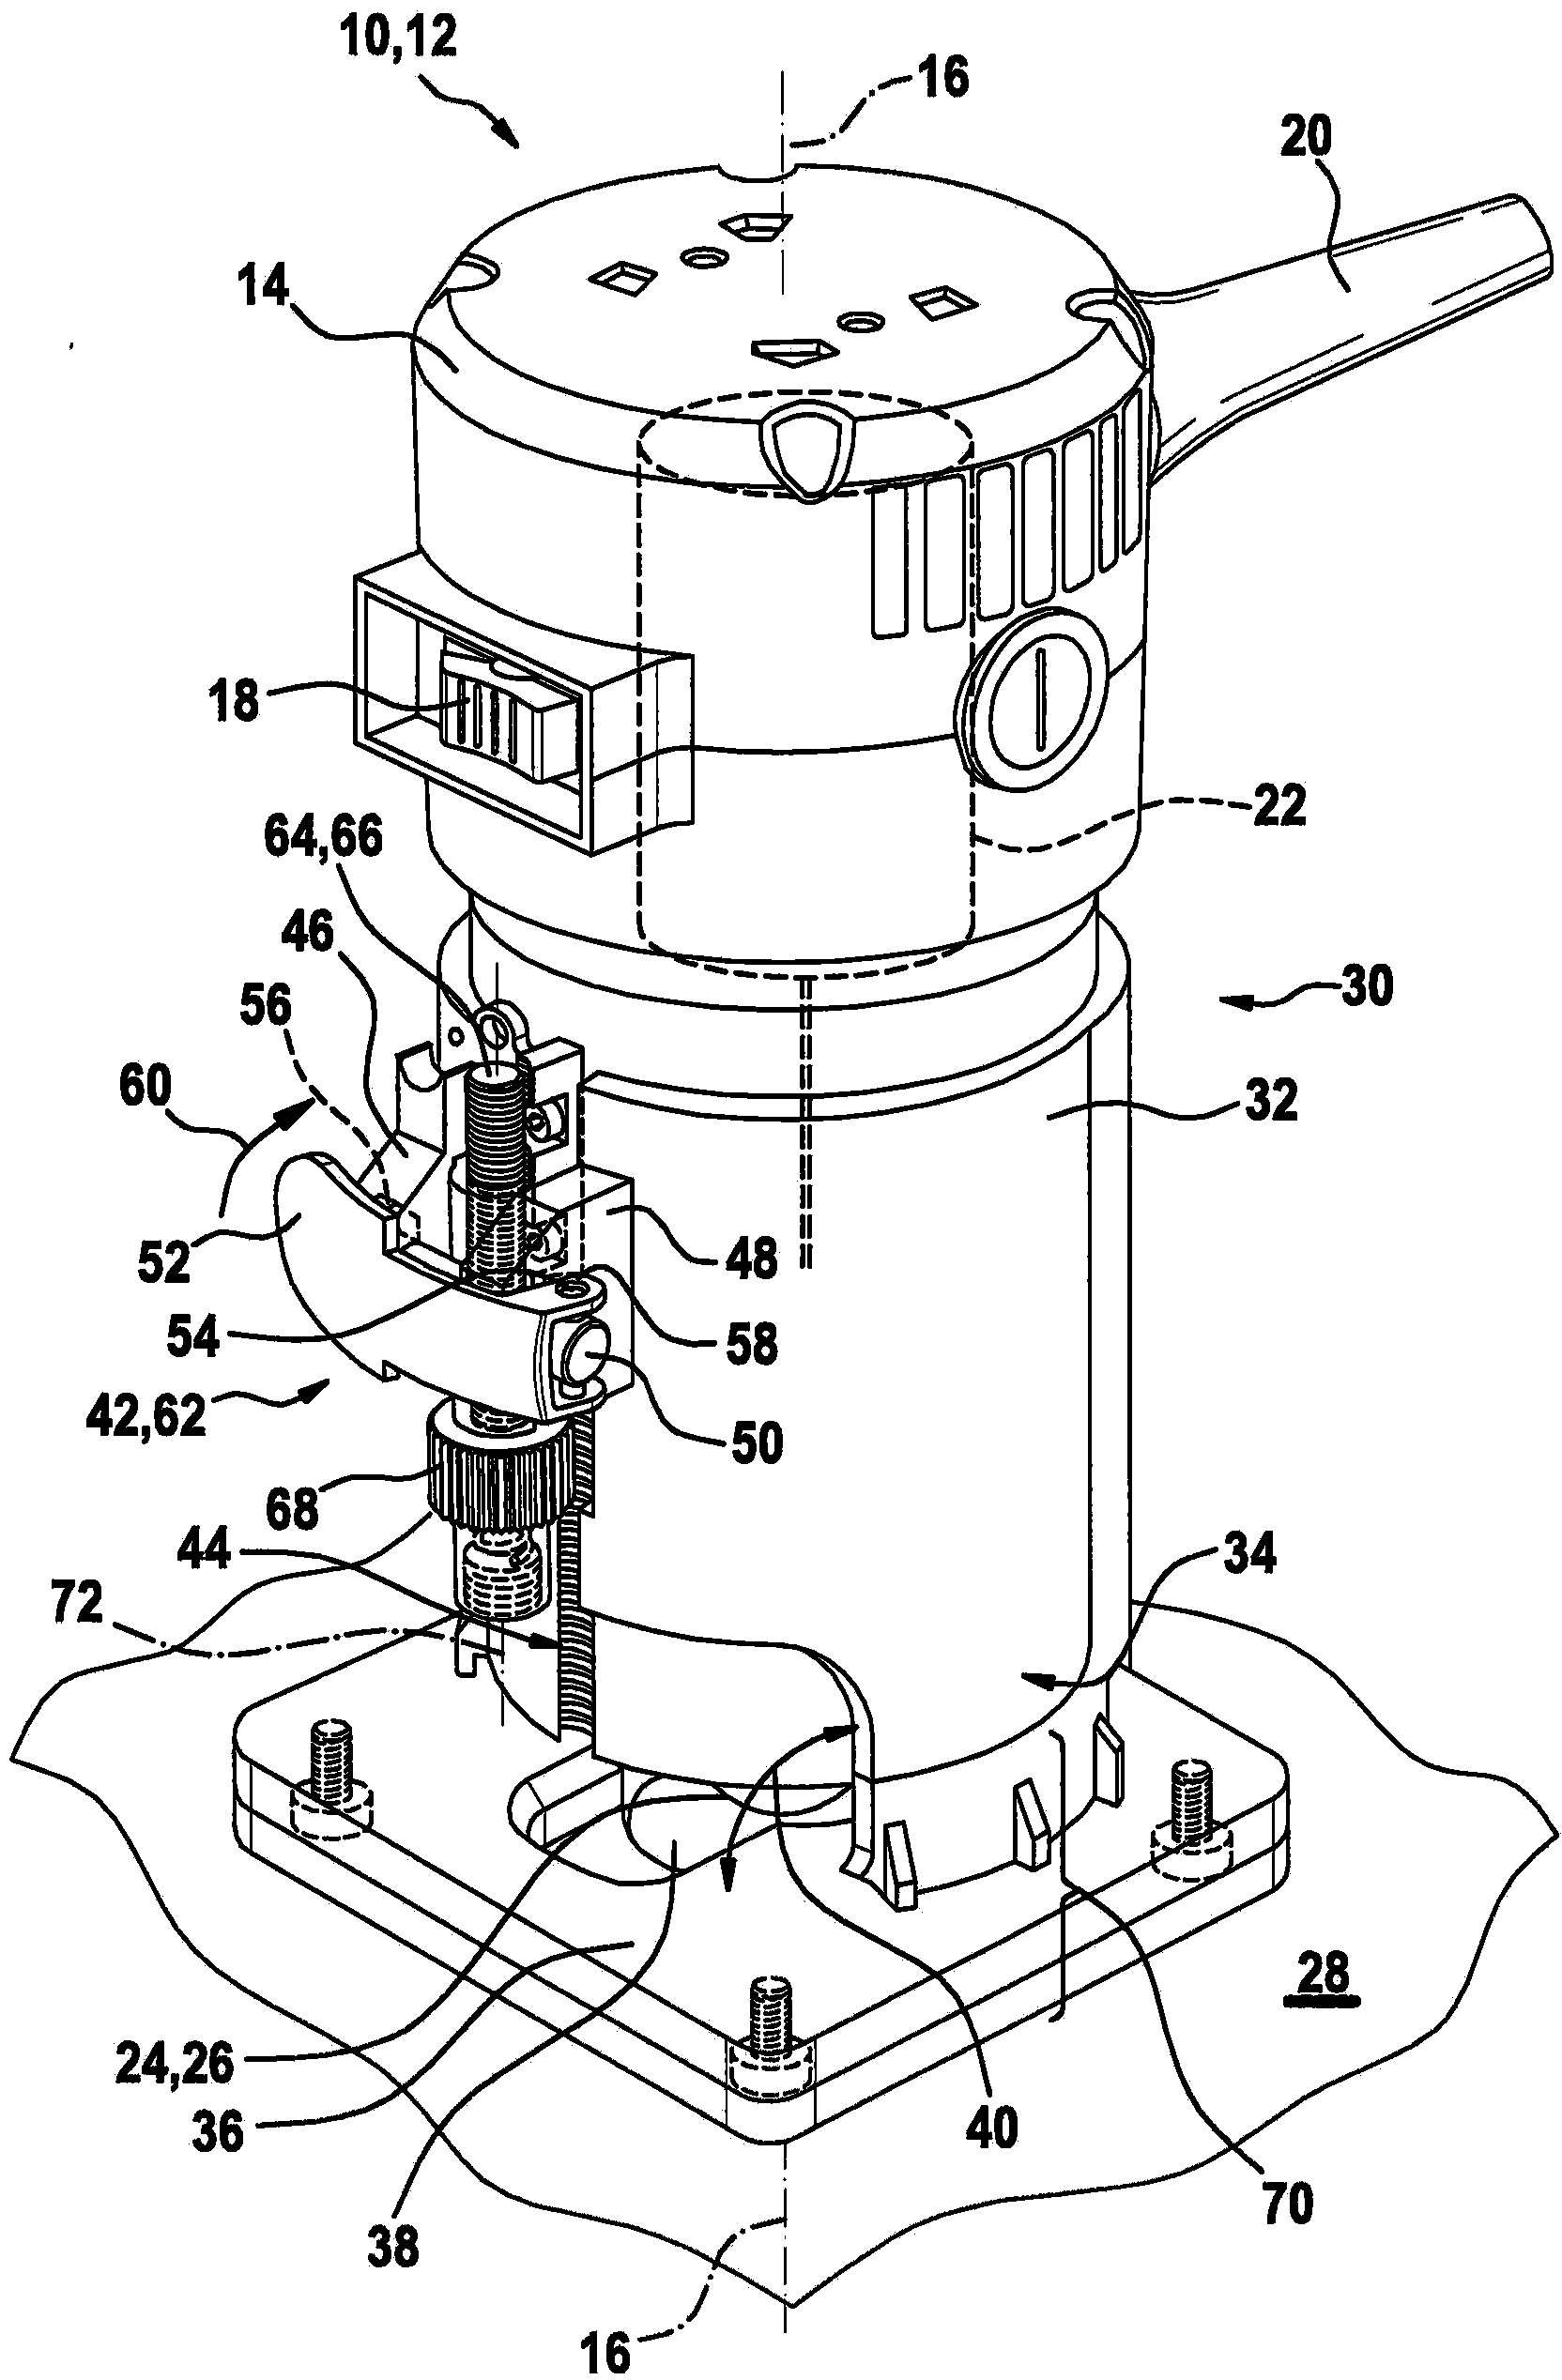 Hand-held power tool with height adjustment device